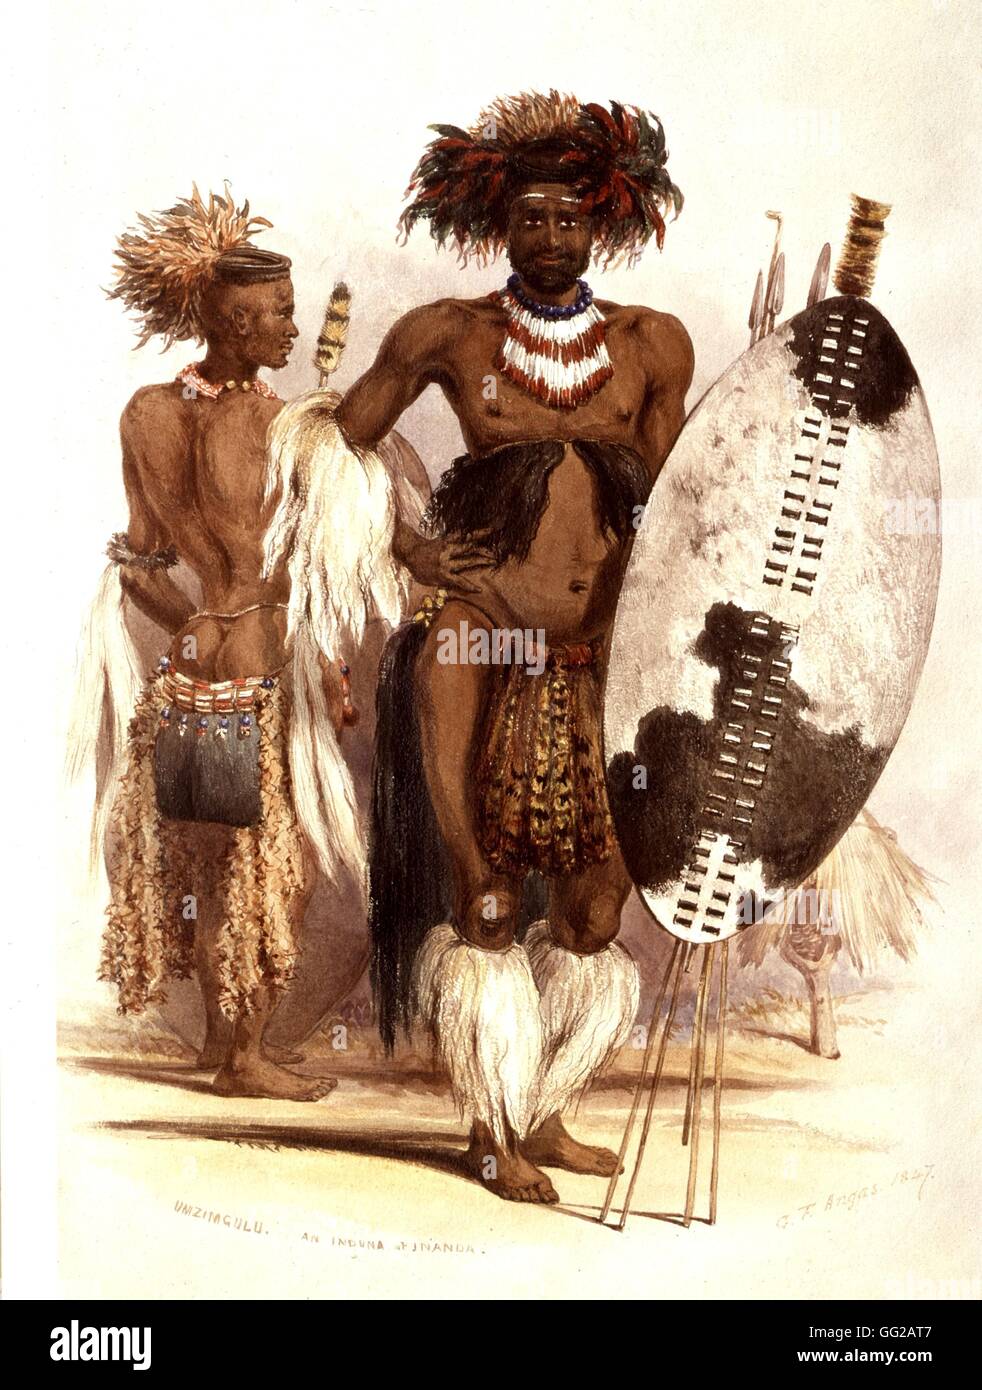 G.F. Angus. Zulu chief dressed as a warrior 1847 South Africa London. British museum Stock Photo